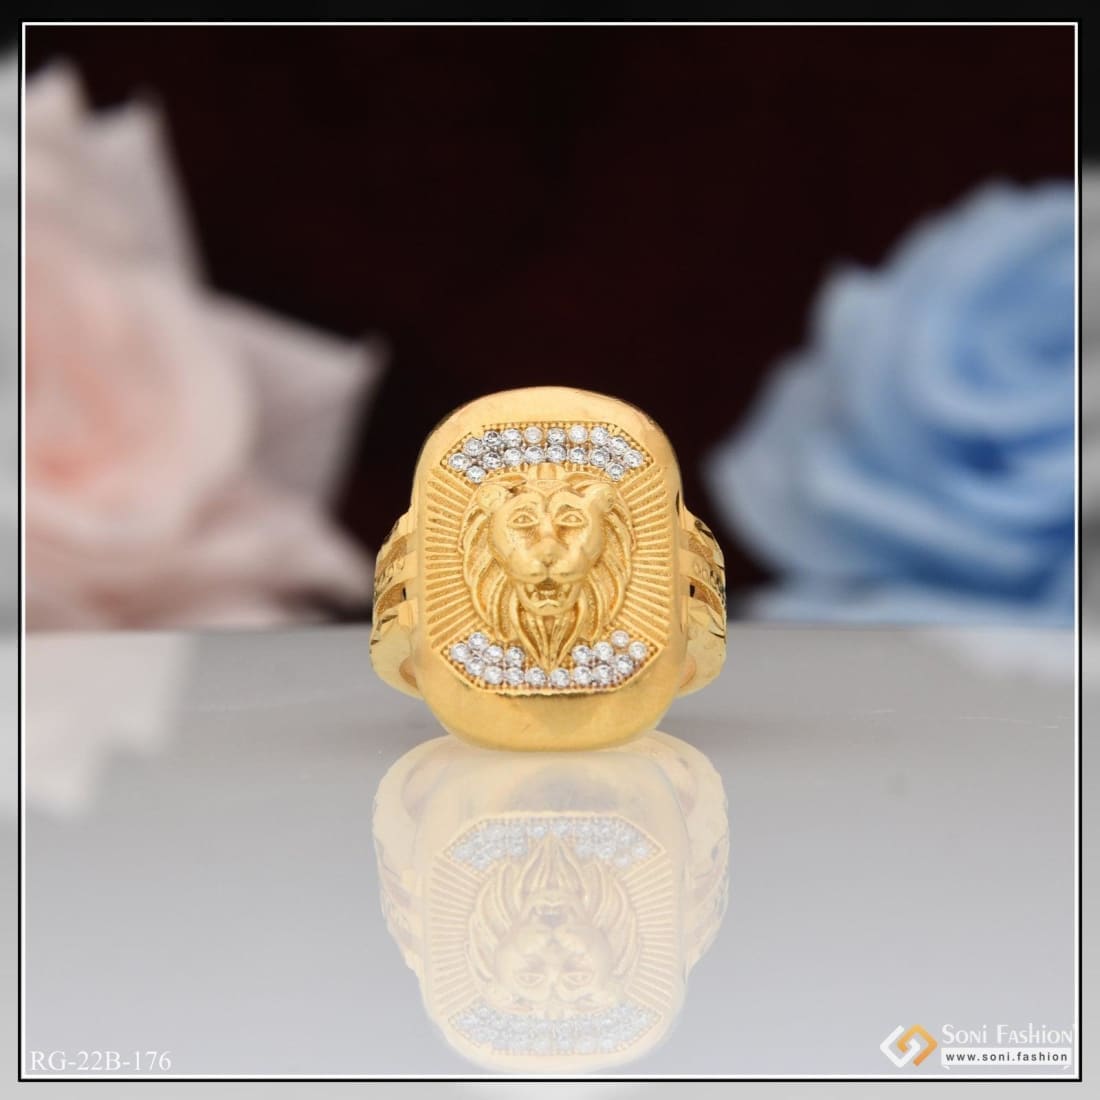 Buy Silver Shine Stainless Steel Black Lion Face Ring For Boys and Men  Online from SilverShine